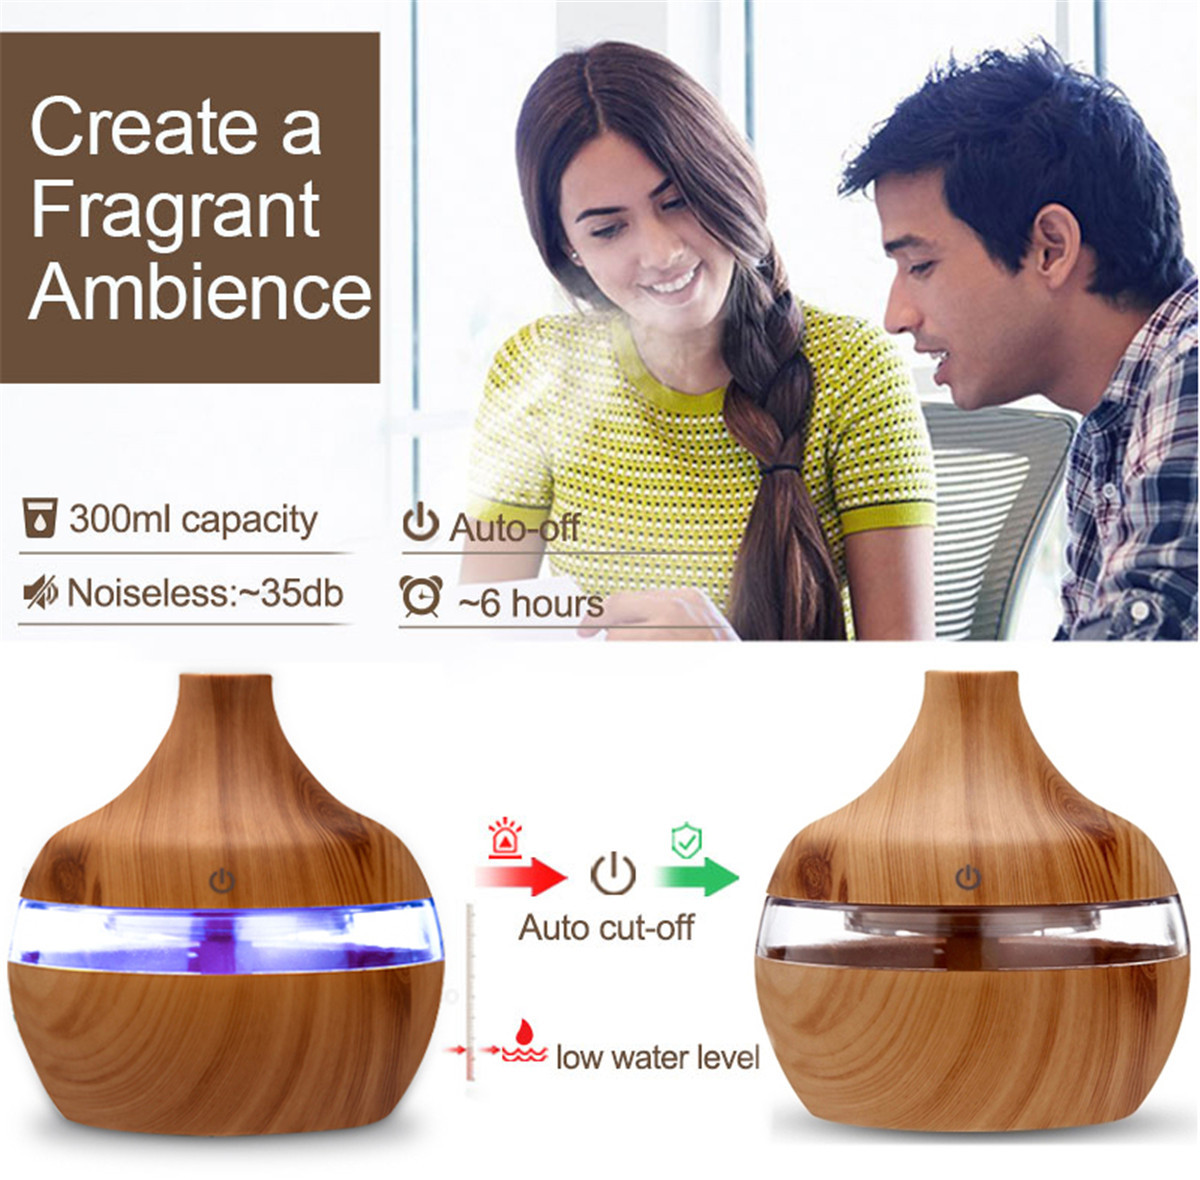 300ml-Electric-Ultrasonic-Air-Mist-Humidifier-Purifier-Aroma-Diffuser-7-Colors-LED-USB-Charging-for--1761154-7